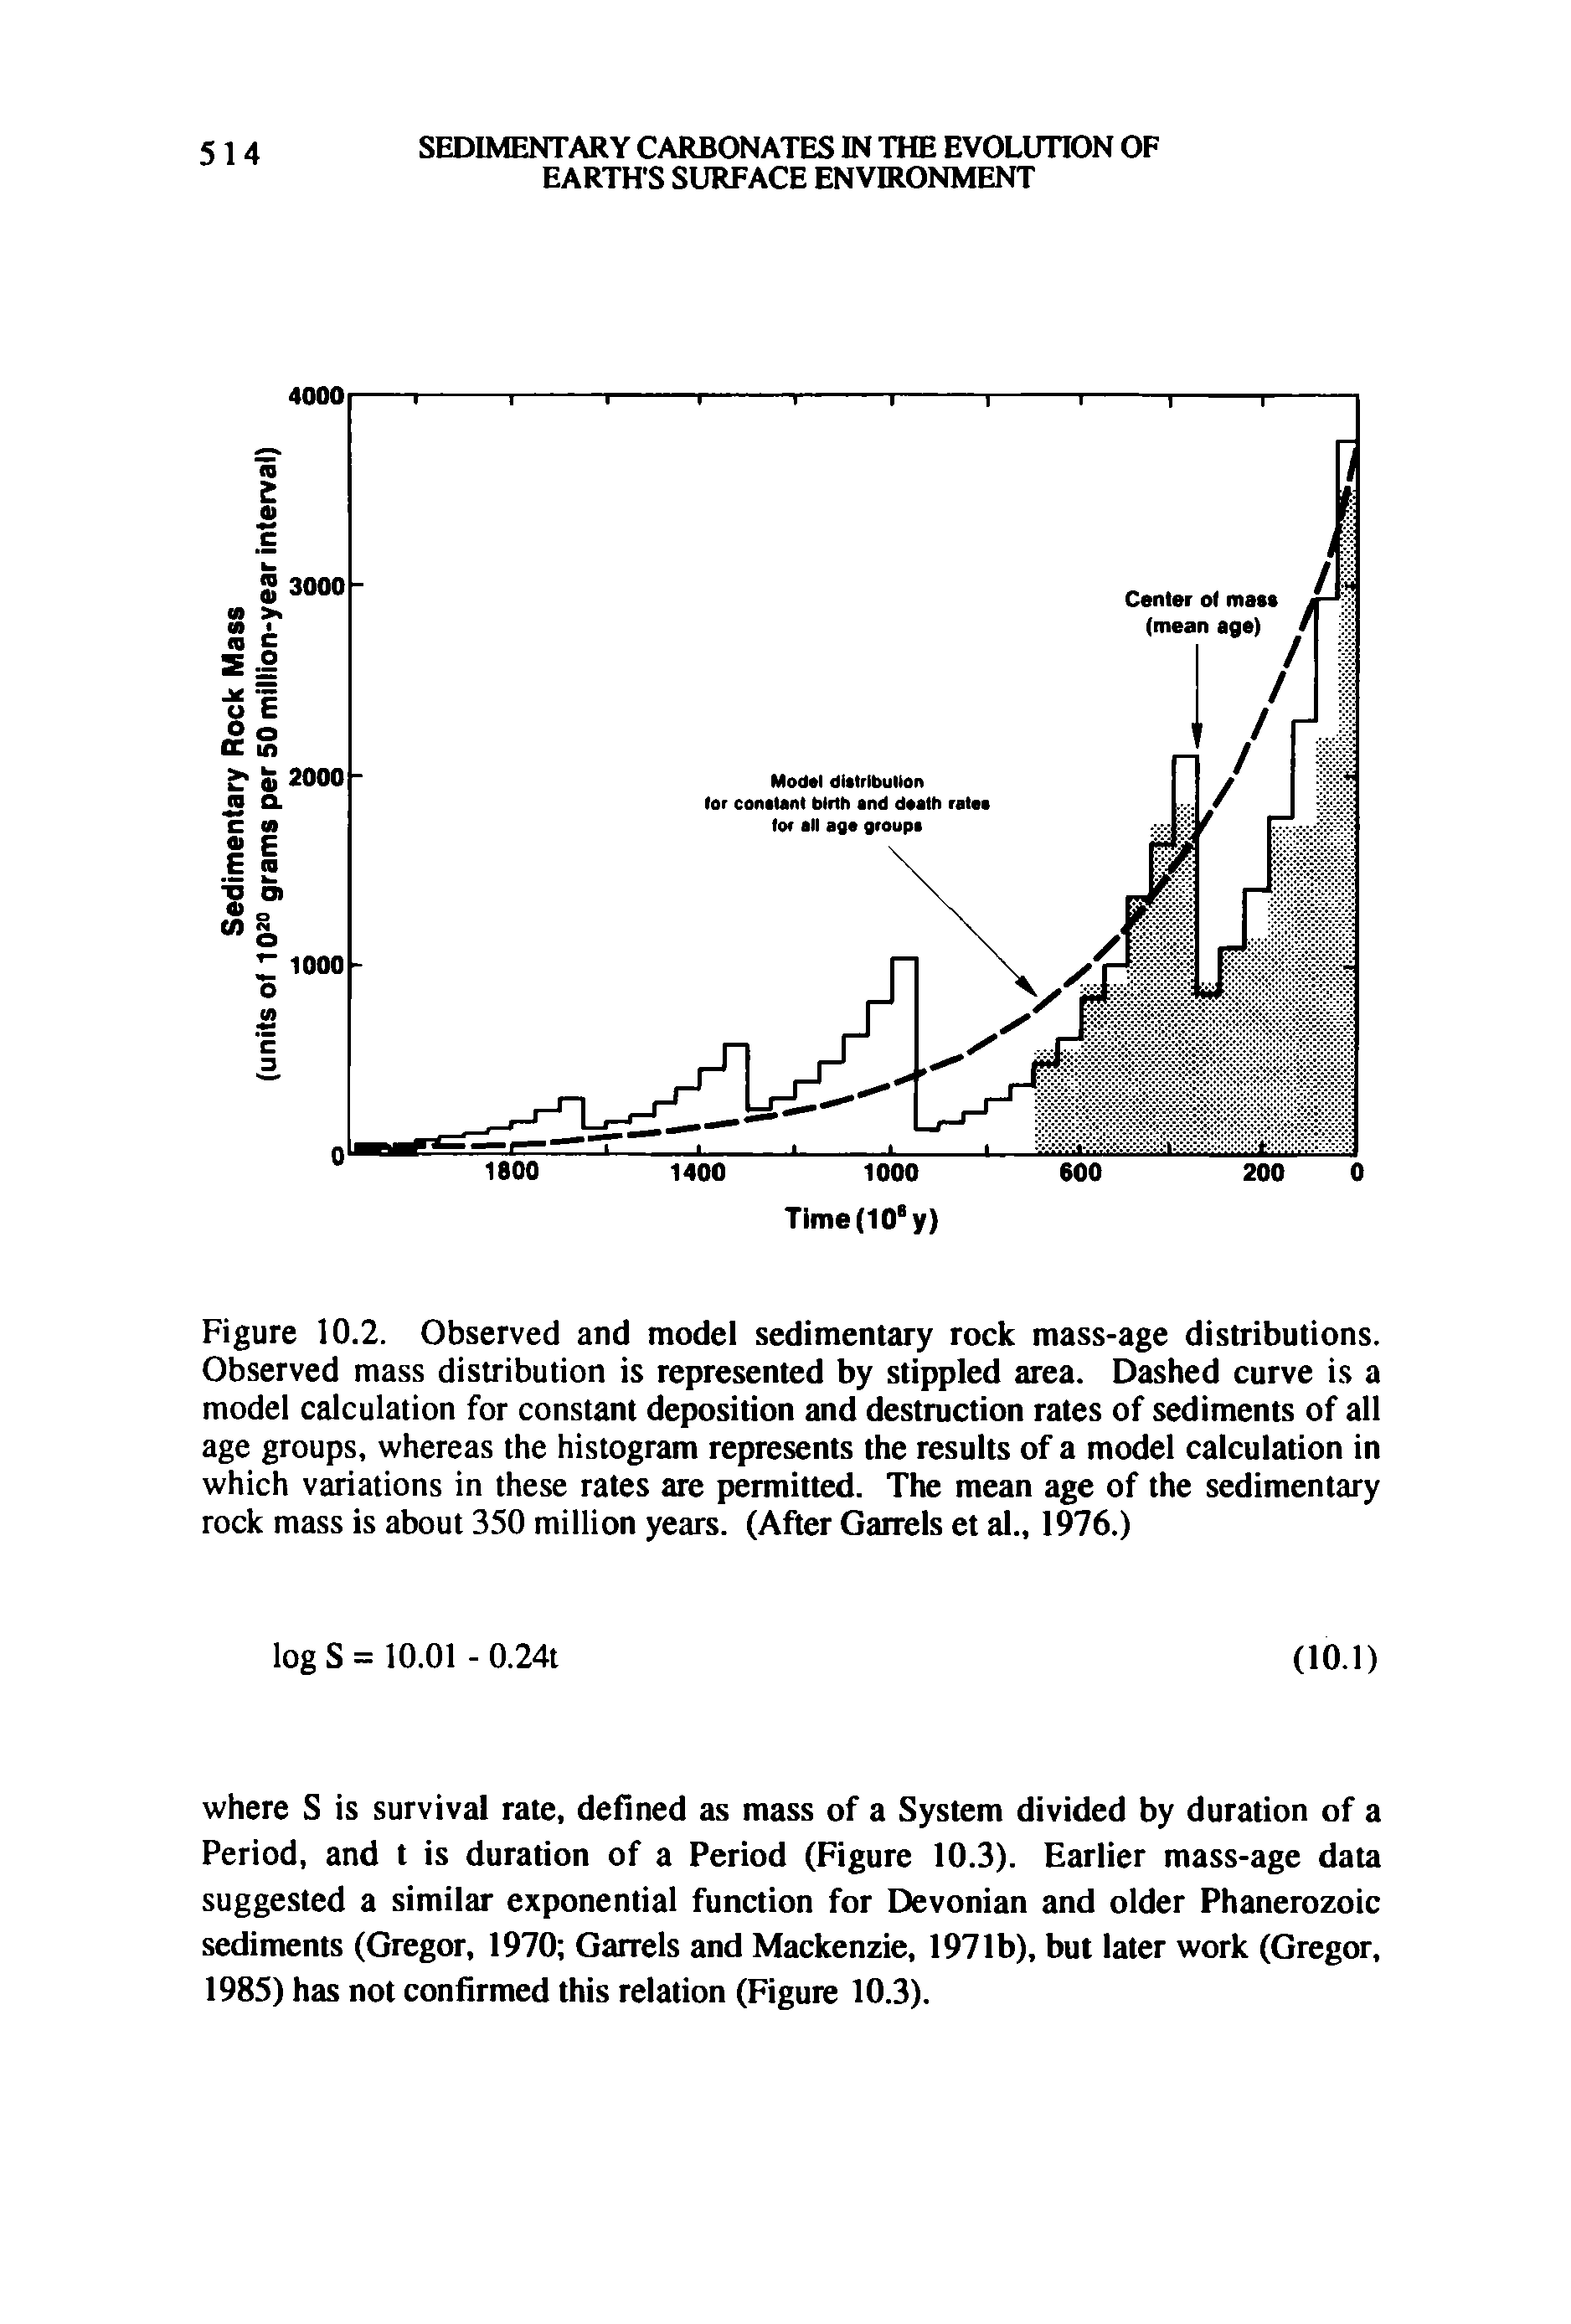 Figure 10.2. Observed and model sedimentary rock mass-age distributions. Observed mass distribution is represented by stippled area. Dashed curve is a model calculation for constant deposition and destruction rates of sediments of all age groups, whereas the histogram represents the results of a model calculation in which variations in these rates are permitted. The mean age of the sedimentary rock mass is about 350 million years. (After Garrels et al., 1976.)...